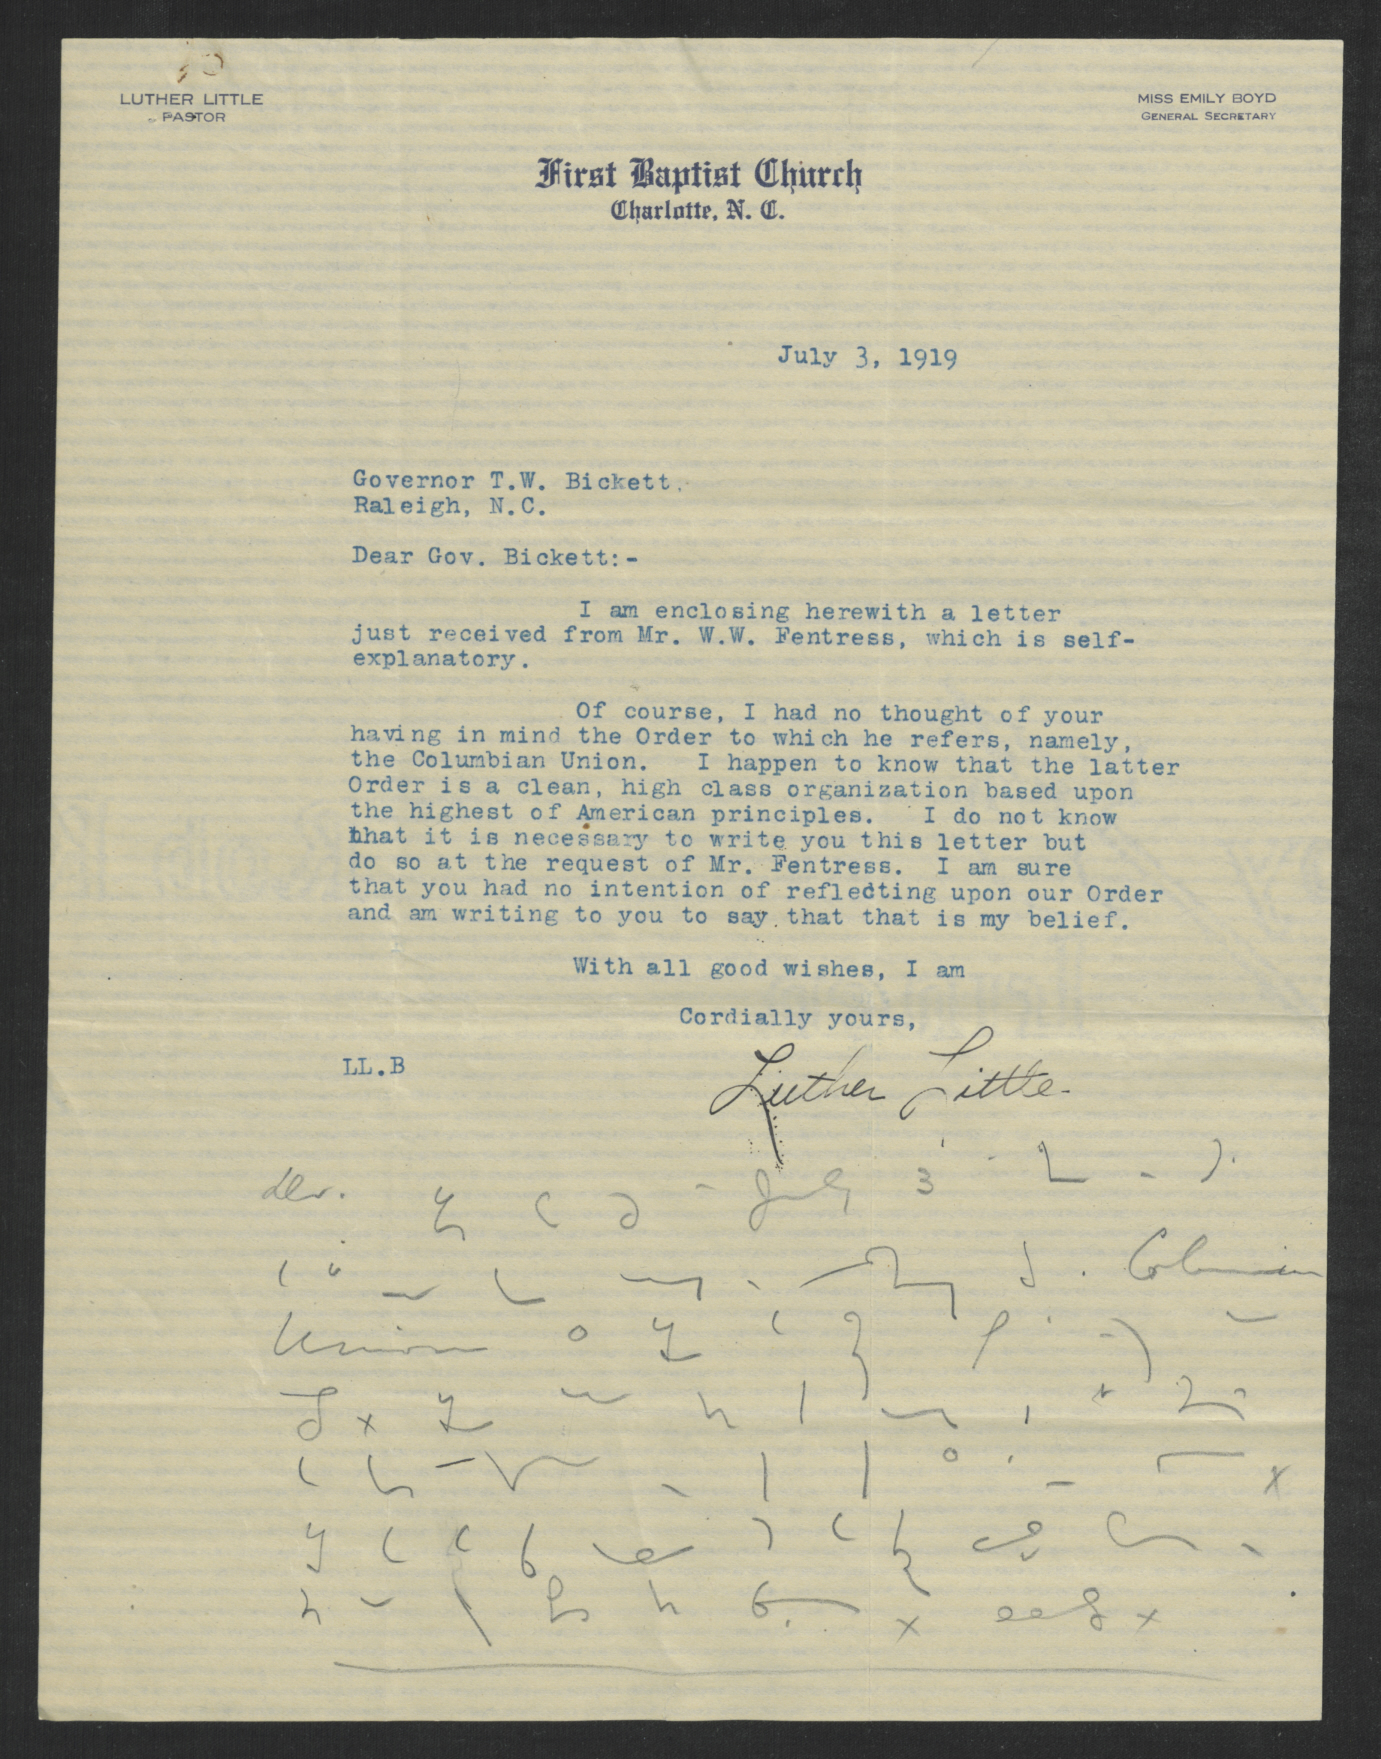 Letter from Luther Little to Gov. Thomas W. Bickett, July 3, 1919